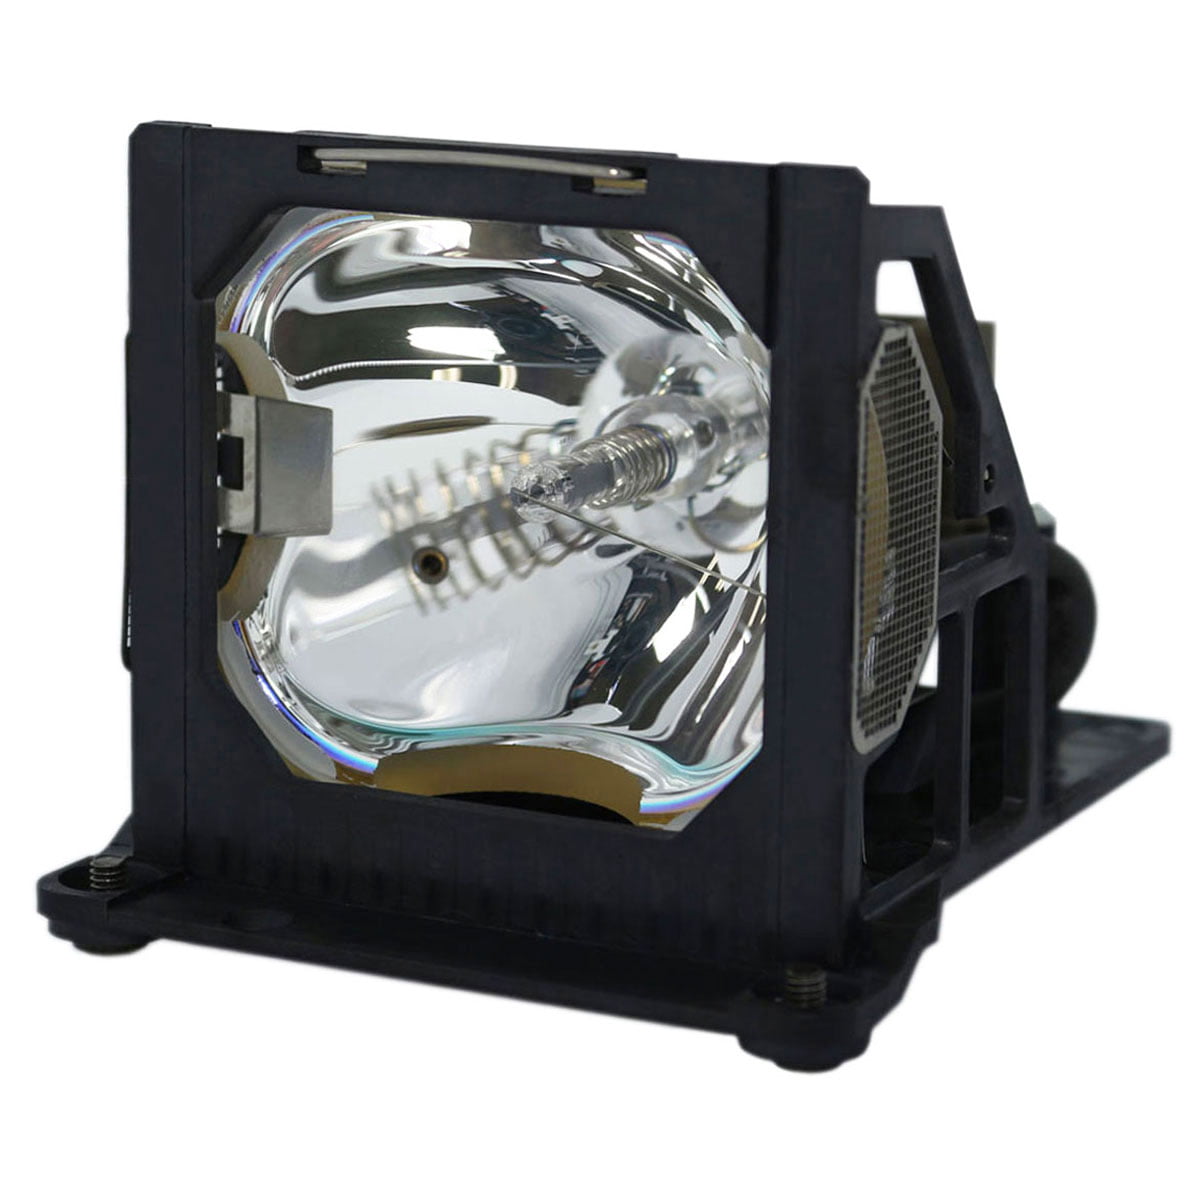 SpArc Platinum for A+K AstroBeam X310 Projector Lamp with Enclosure